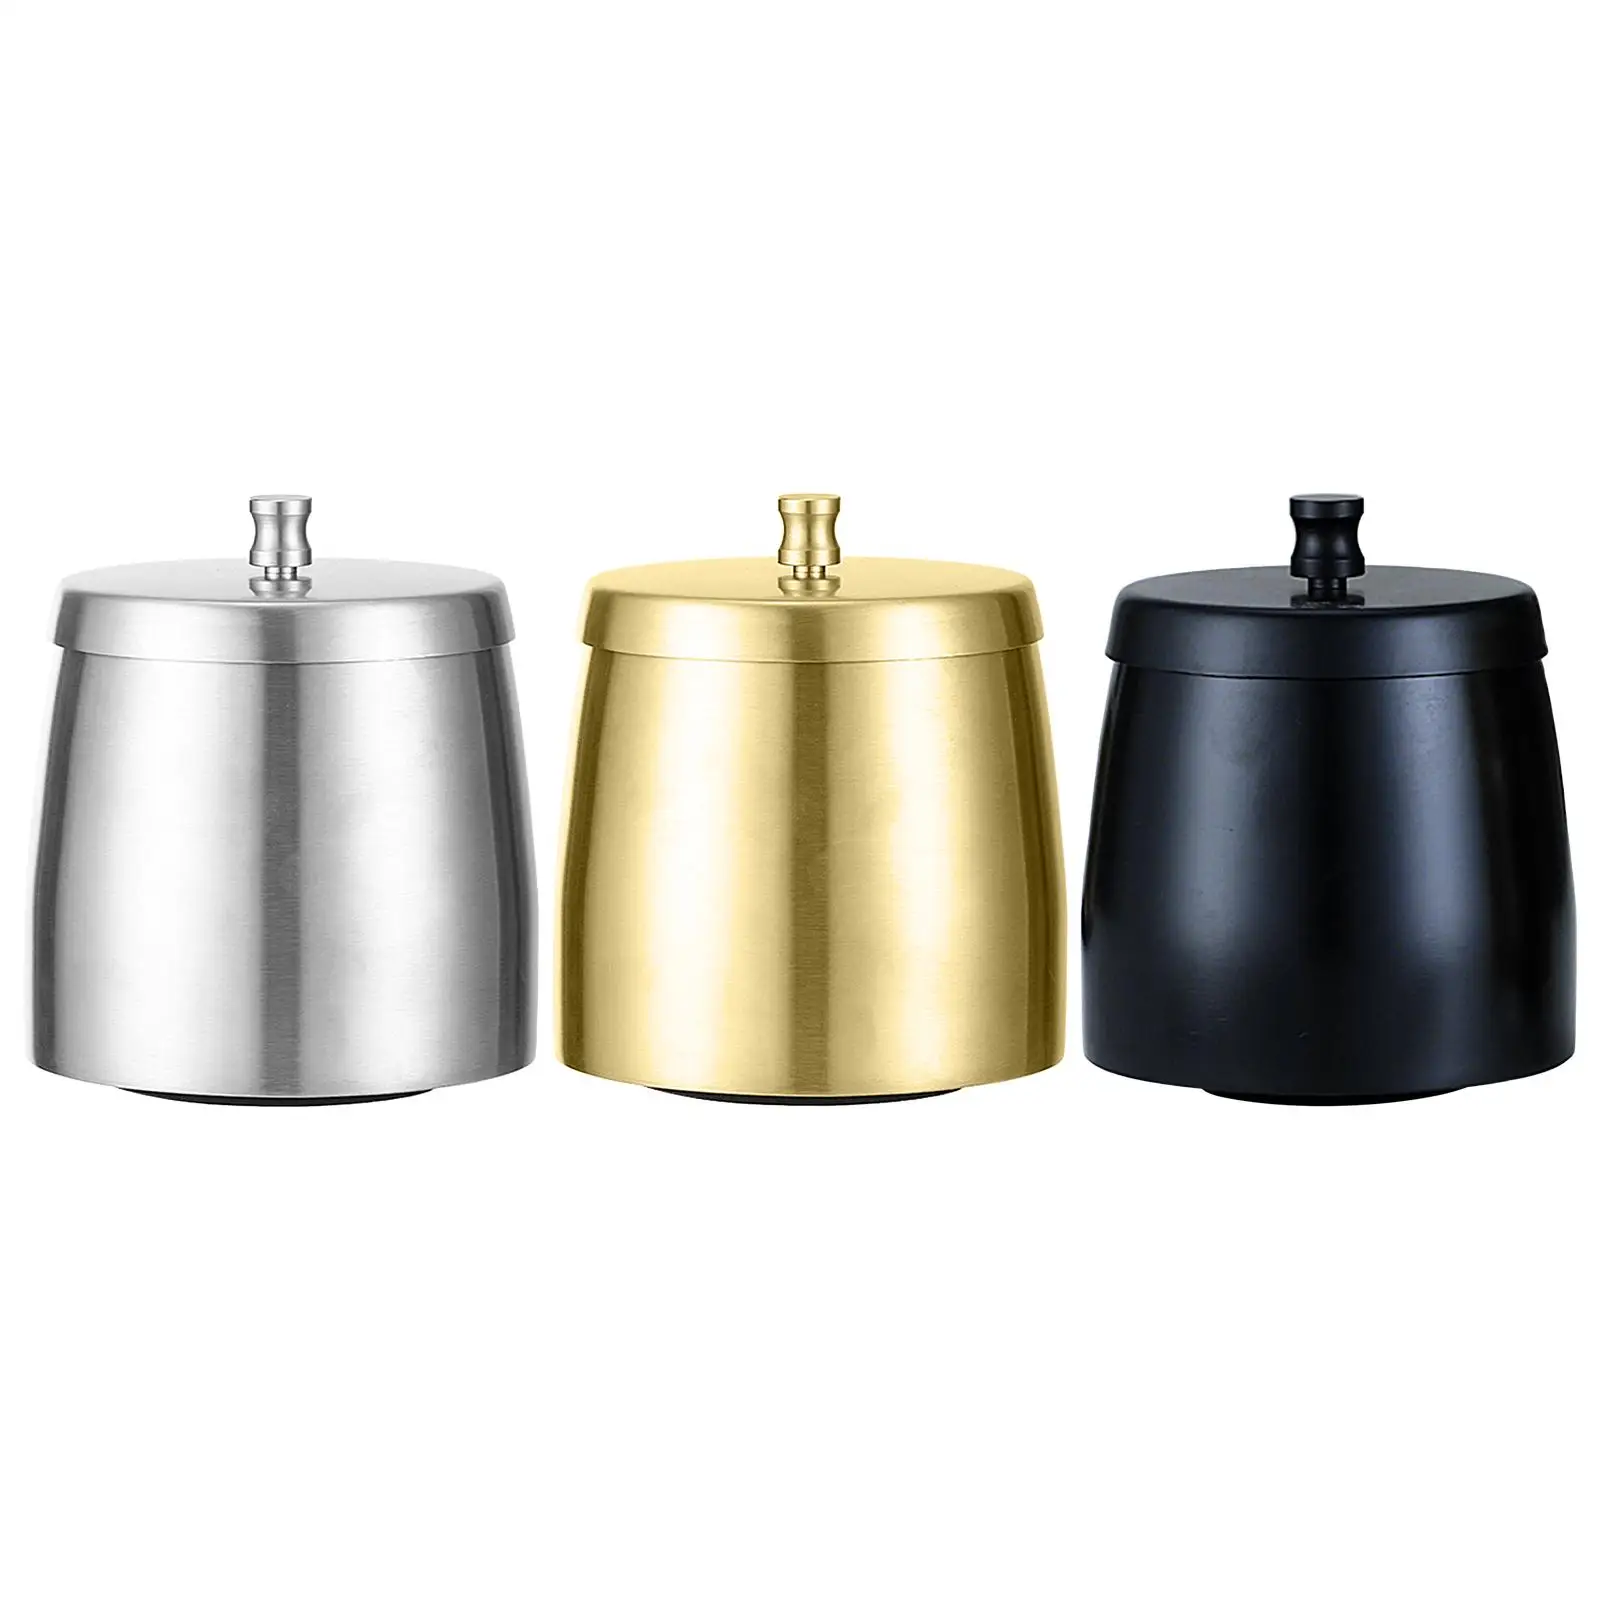 Windproof , Stainless Steel with Lid easy to clean Portable Standing Cigarette Butt Container for  Ashes Tabletop Office Garden